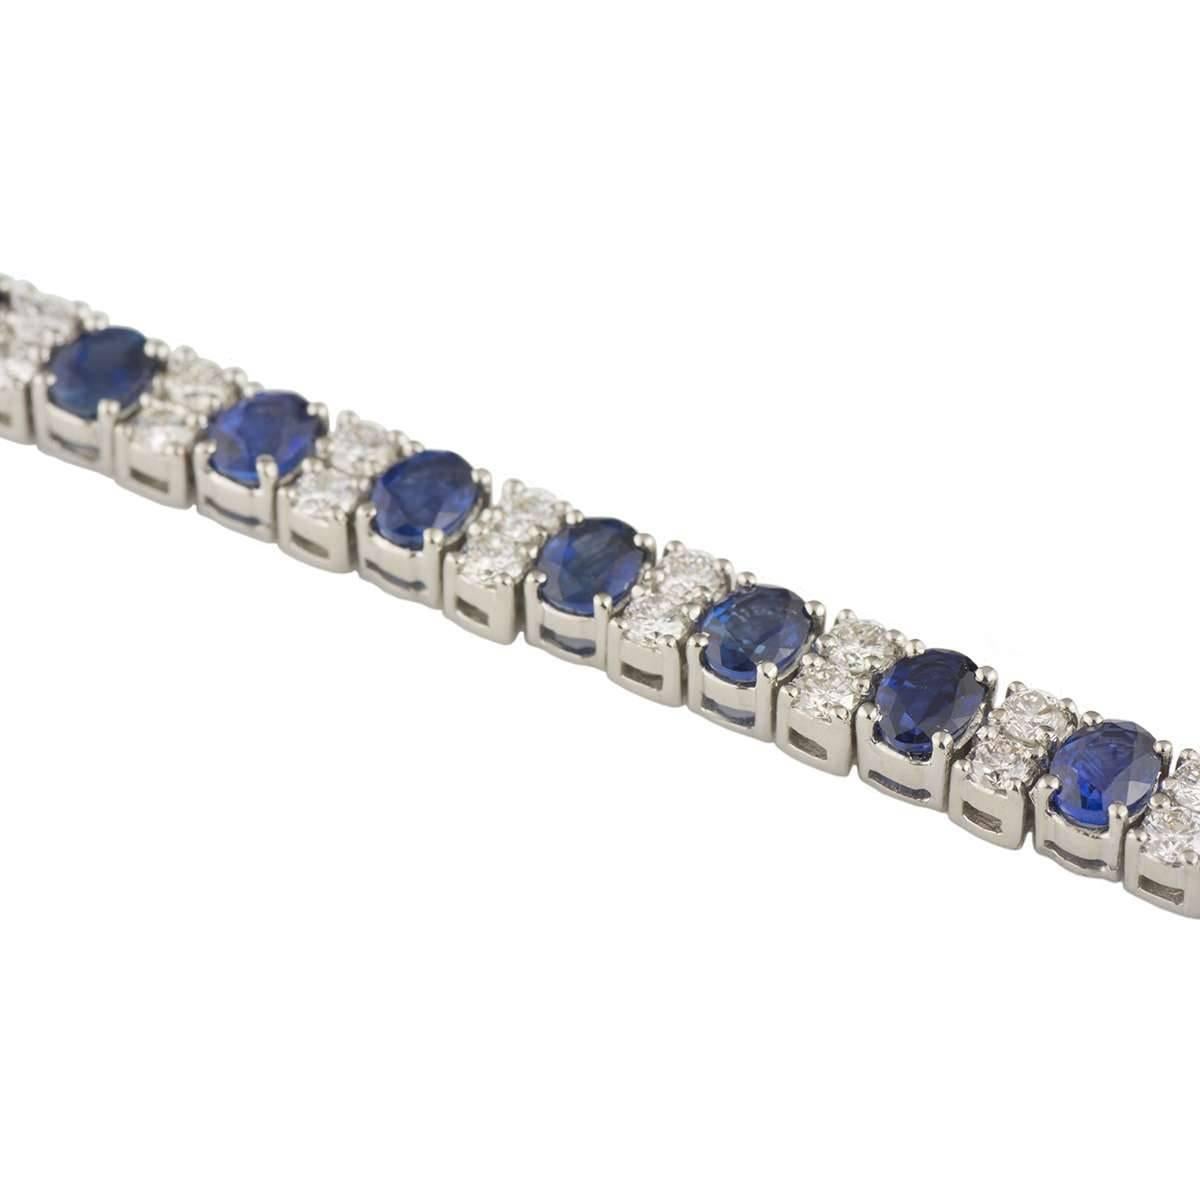 A beautiful 18k white gold sapphire and diamond bracelet. The bracelet comprises of 29 oval cut sapphires alternating with diamonds totalling 58 round brilliant cuts. The sapphires have a total weight of 5.77ct with a deep blue hue throughout. The